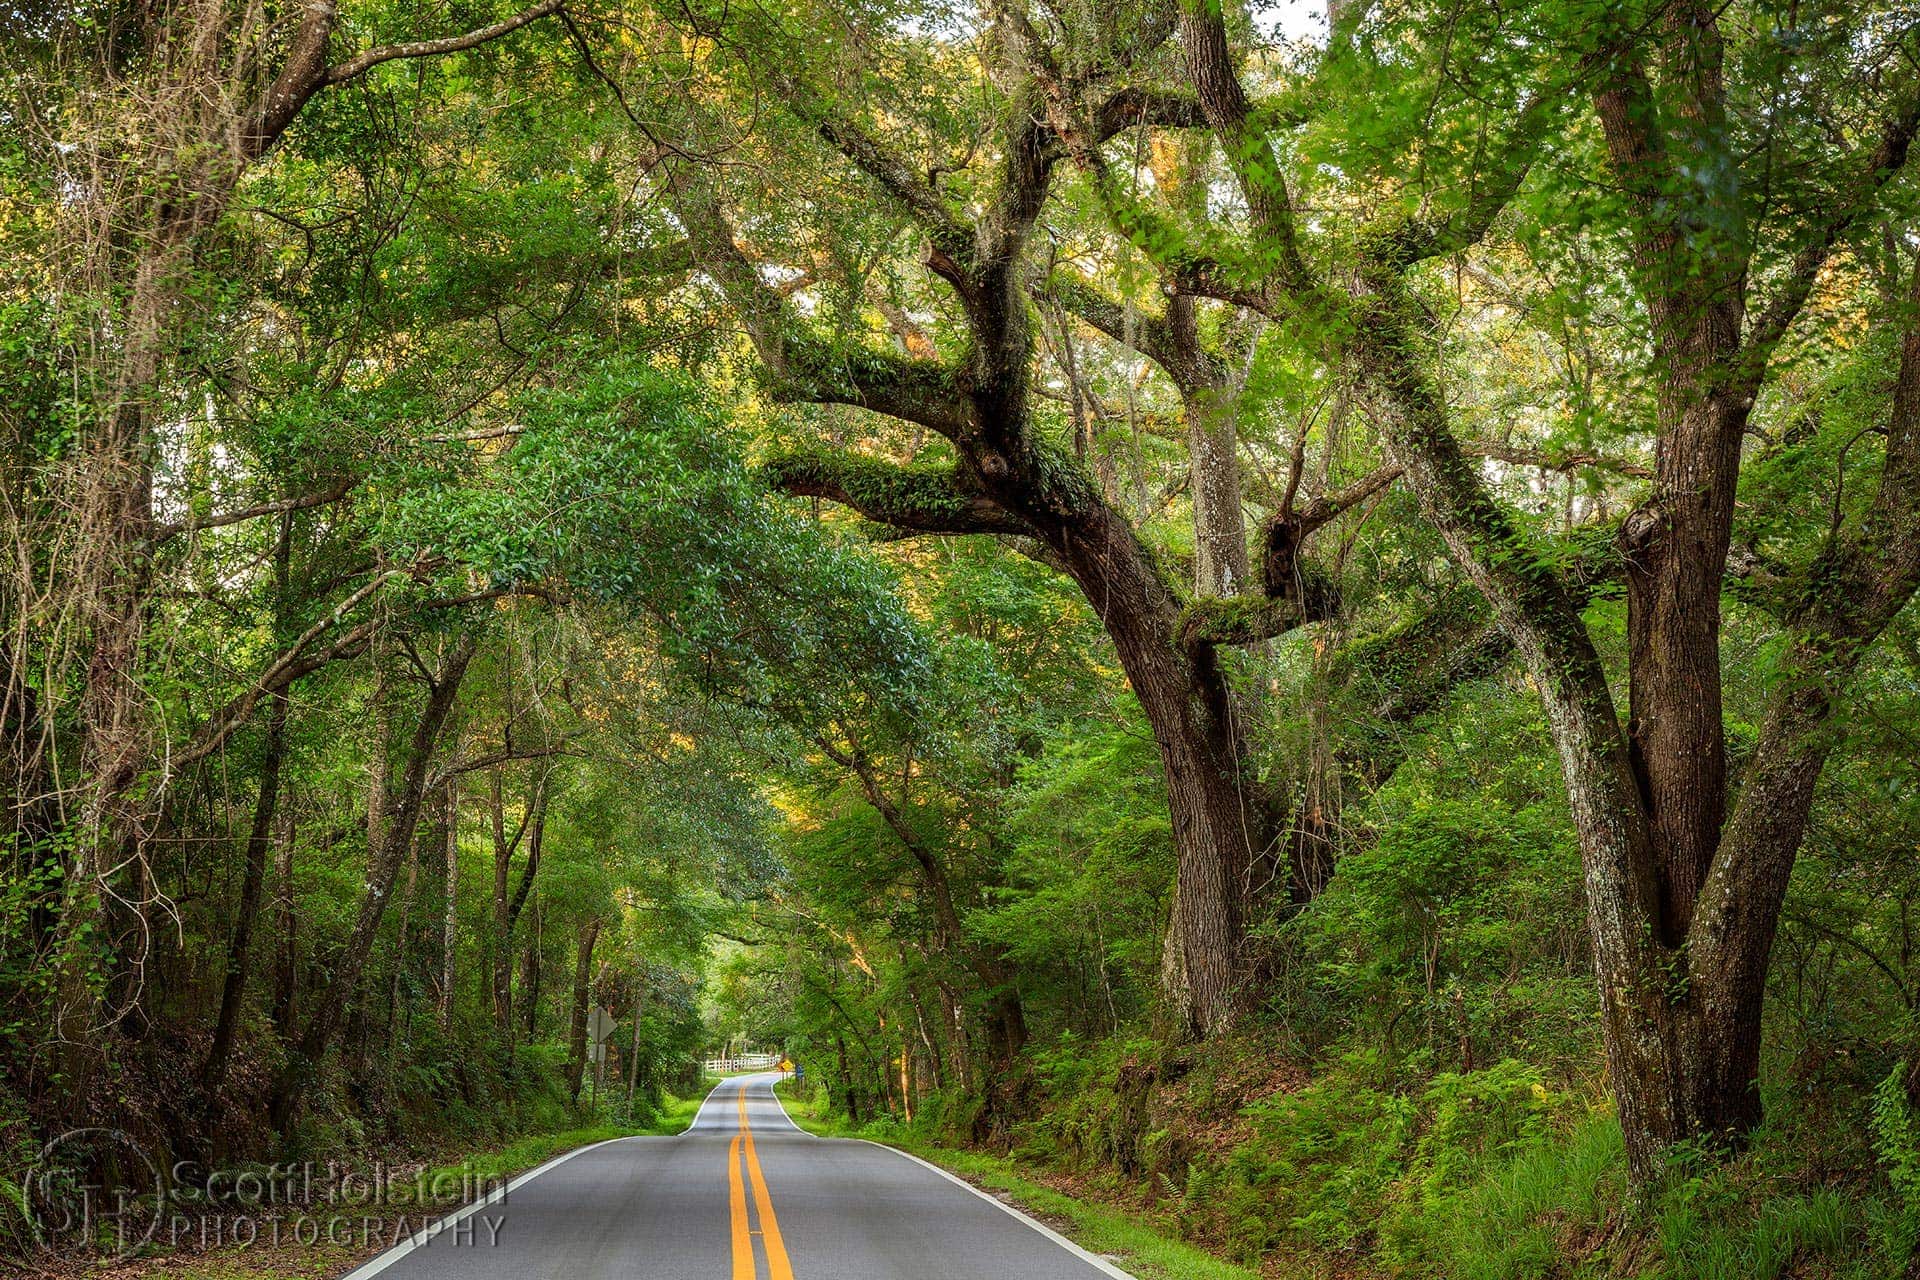 Large southern live oaks tower over Miccosukee Road in Tallahassee, Florida, creating a canopy over the road.